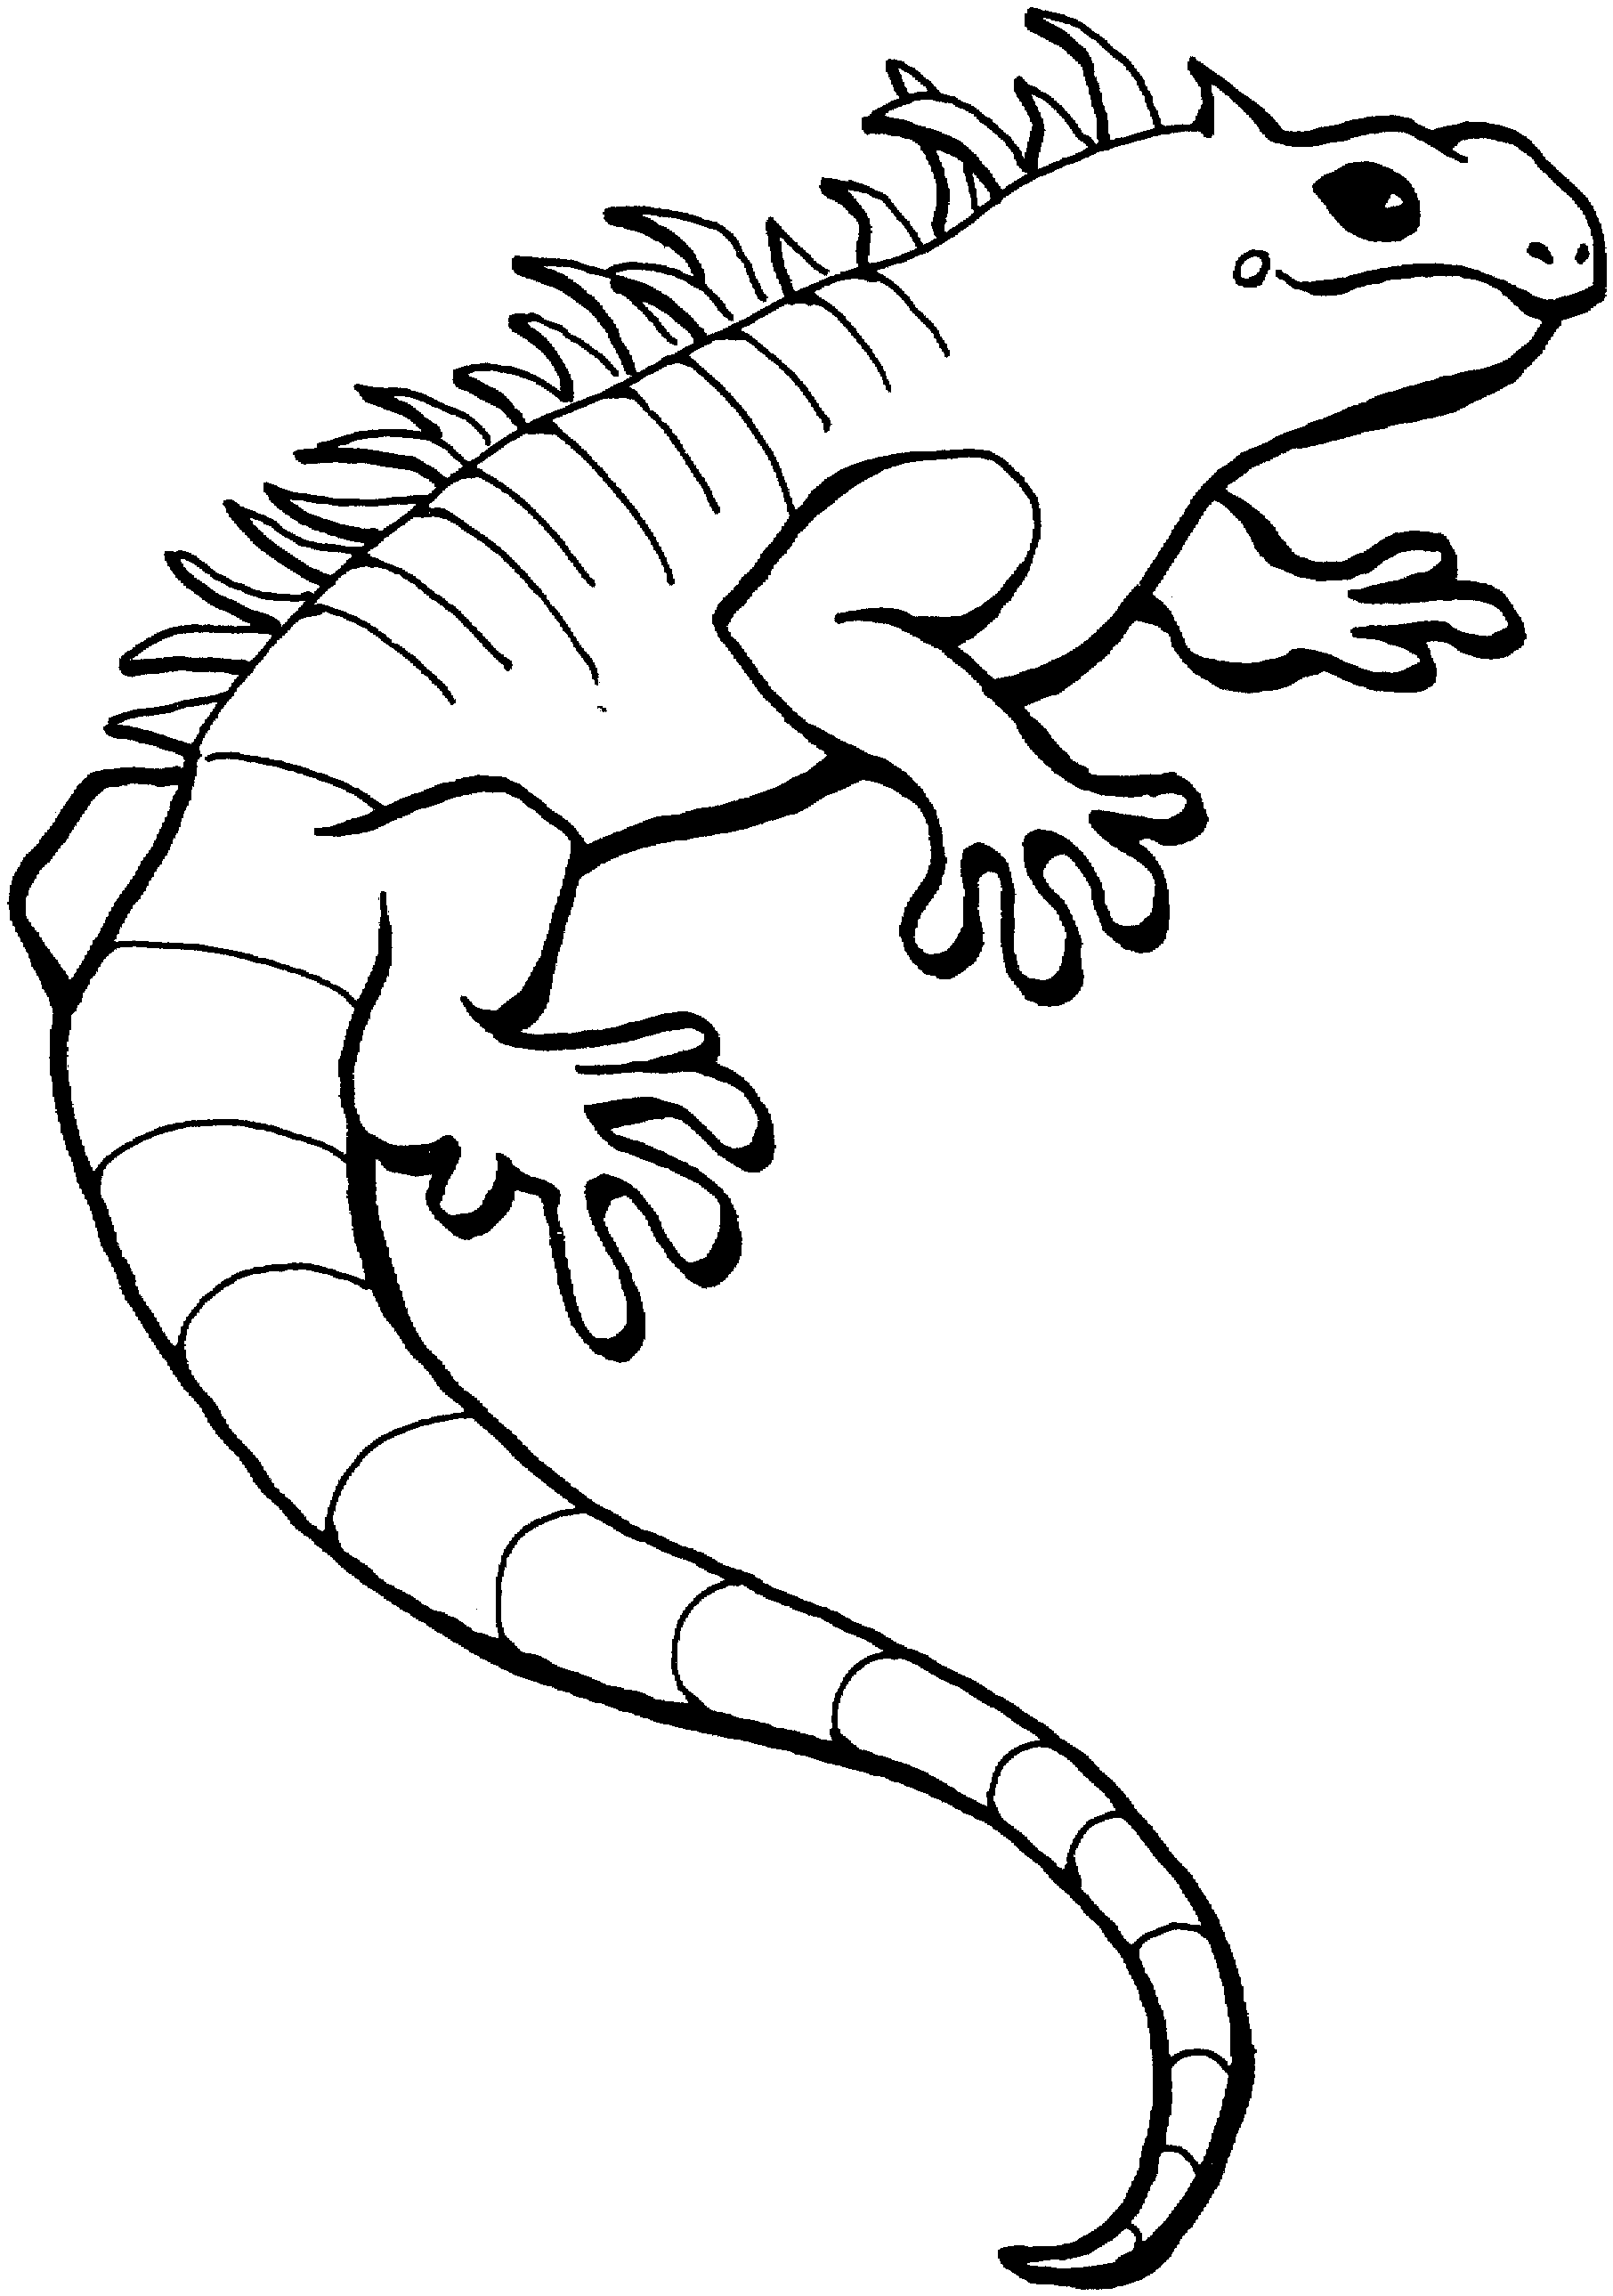 Coloring Pages Of A Lizard - Coloring Home